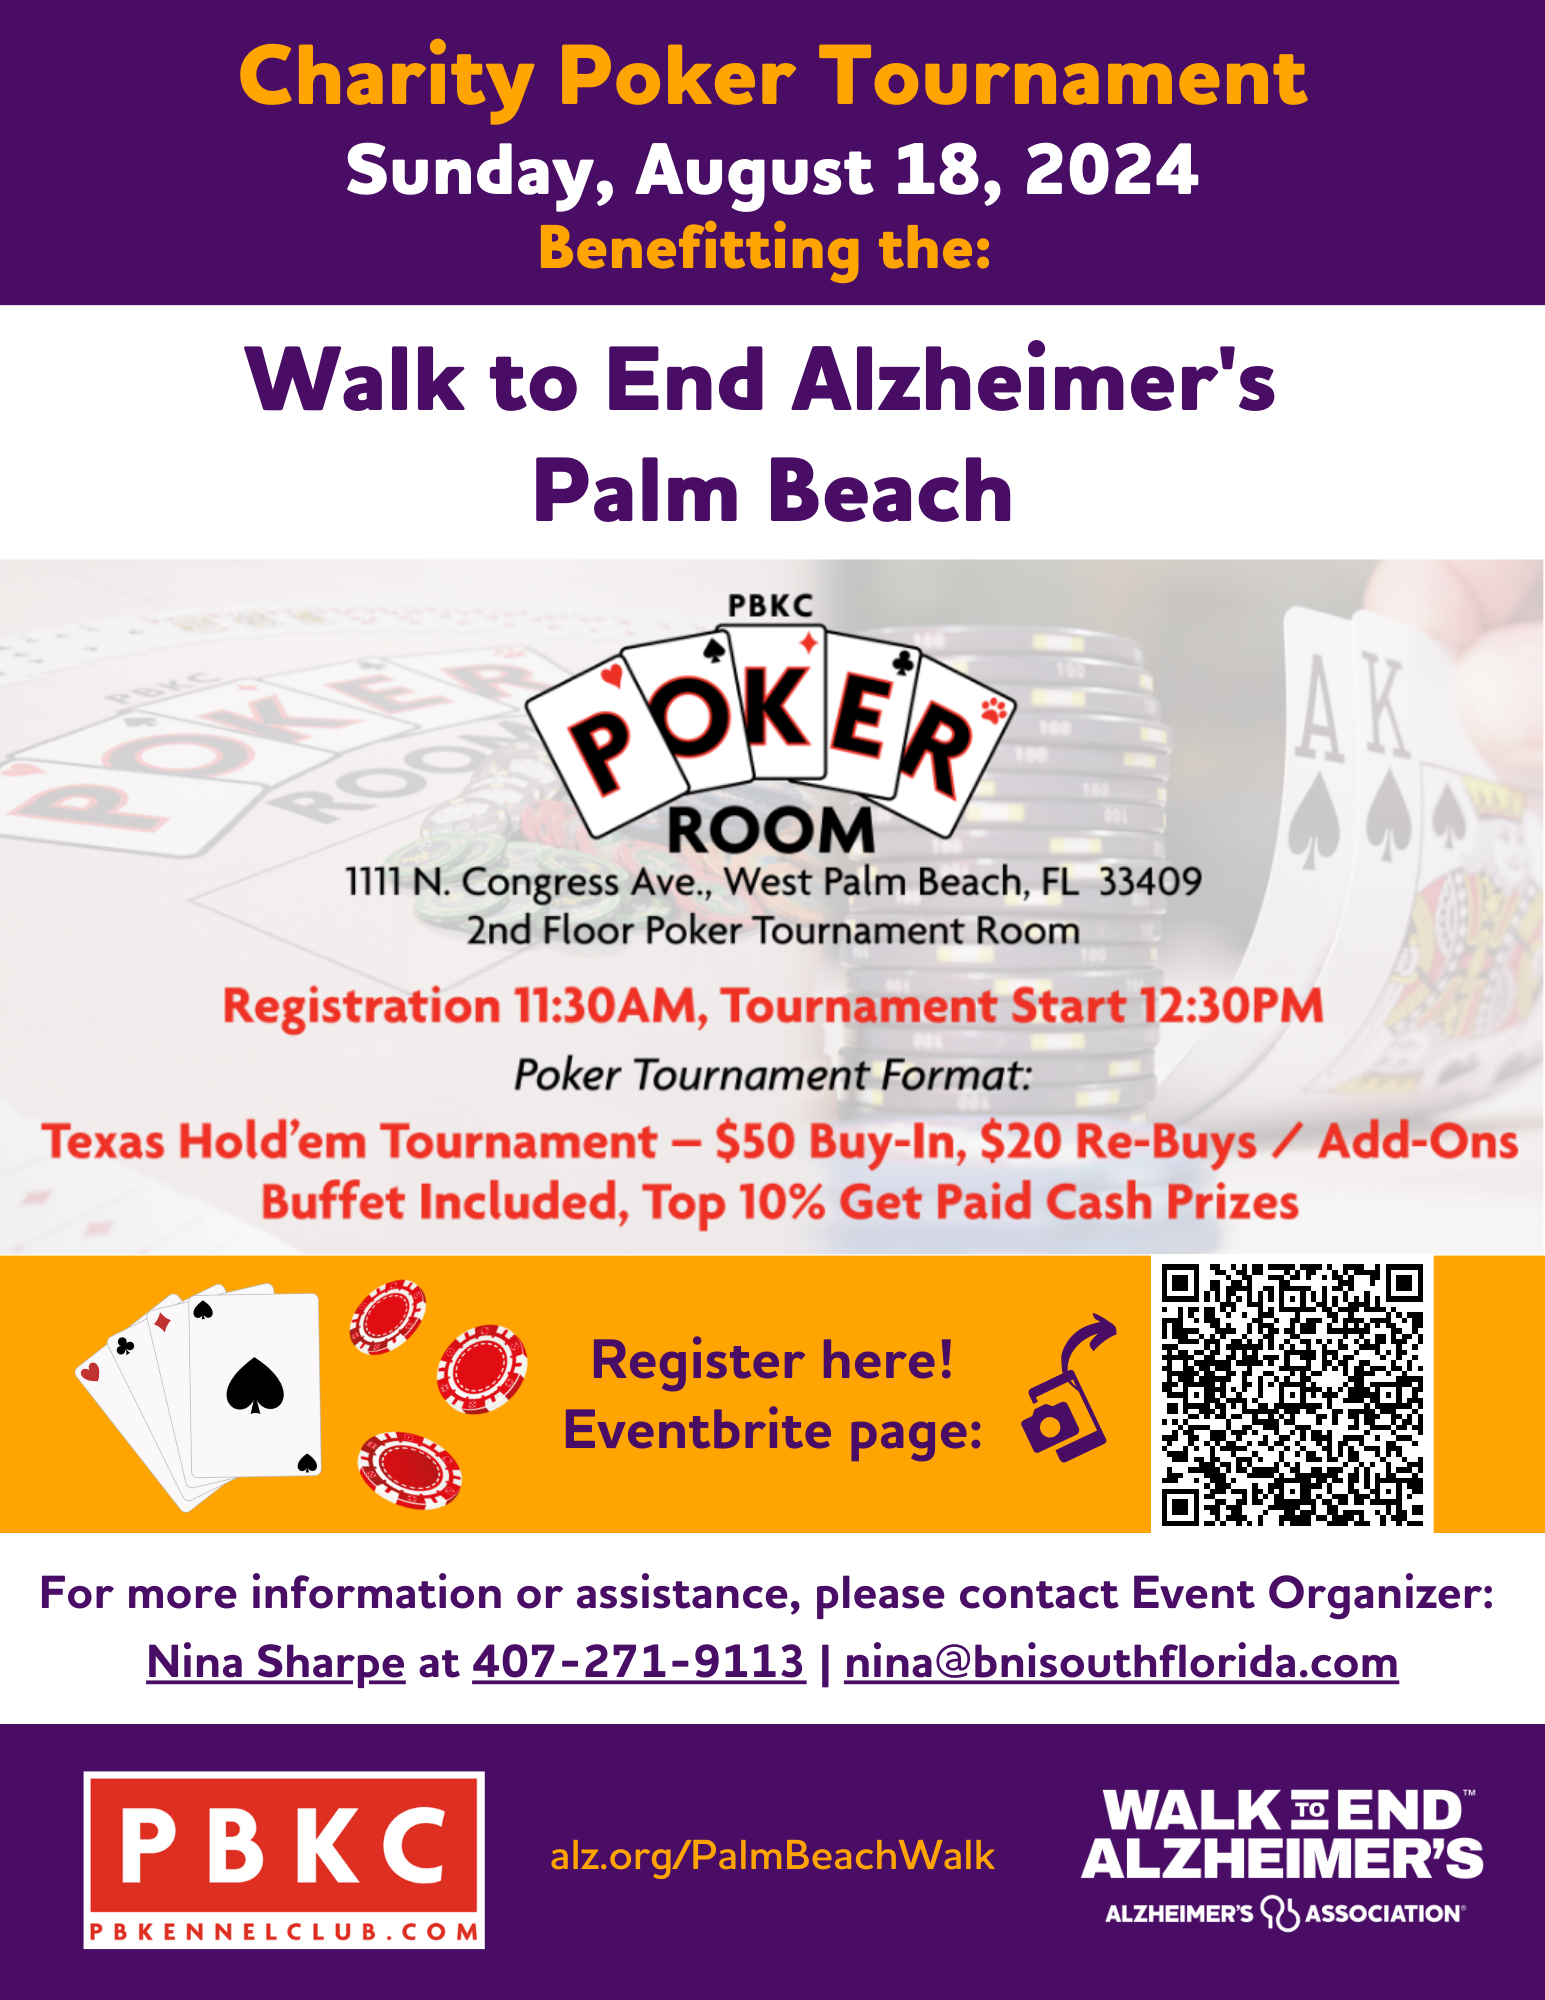 2024 Charity Poker Tournament_Sunday, August 18th_At the PBK